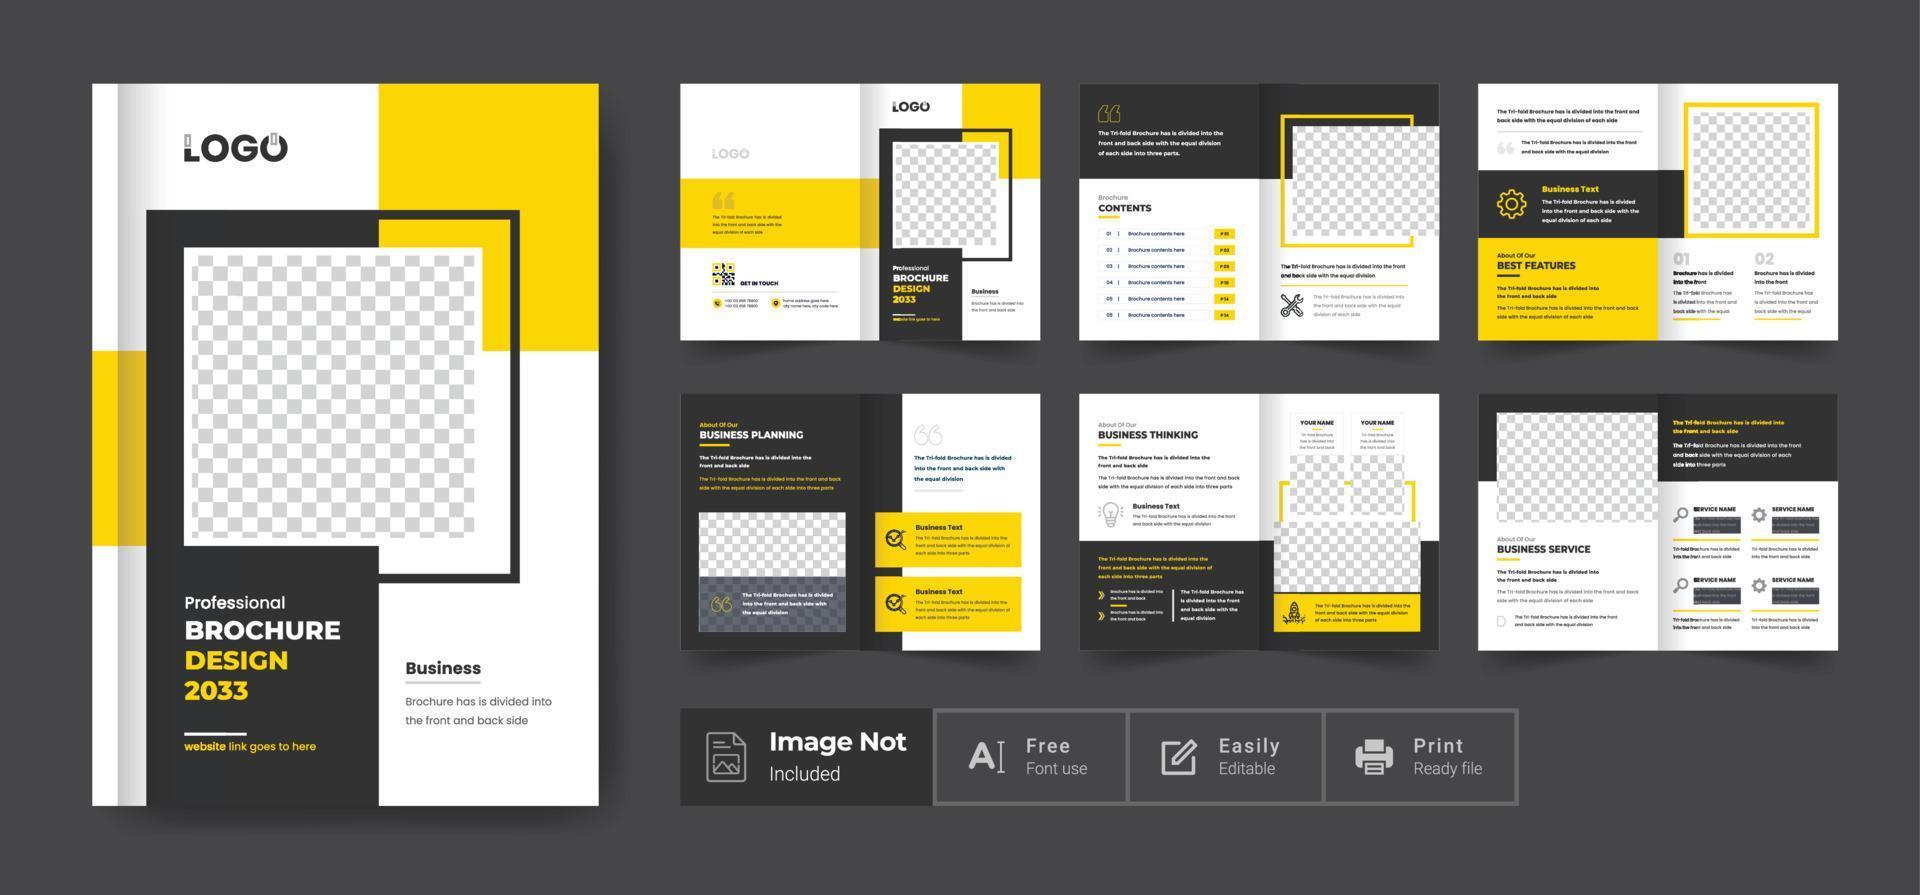 Business brochure template. profile pages layout design, modern colorful shape minimalist business brochure or annual report template abstract design theme vector